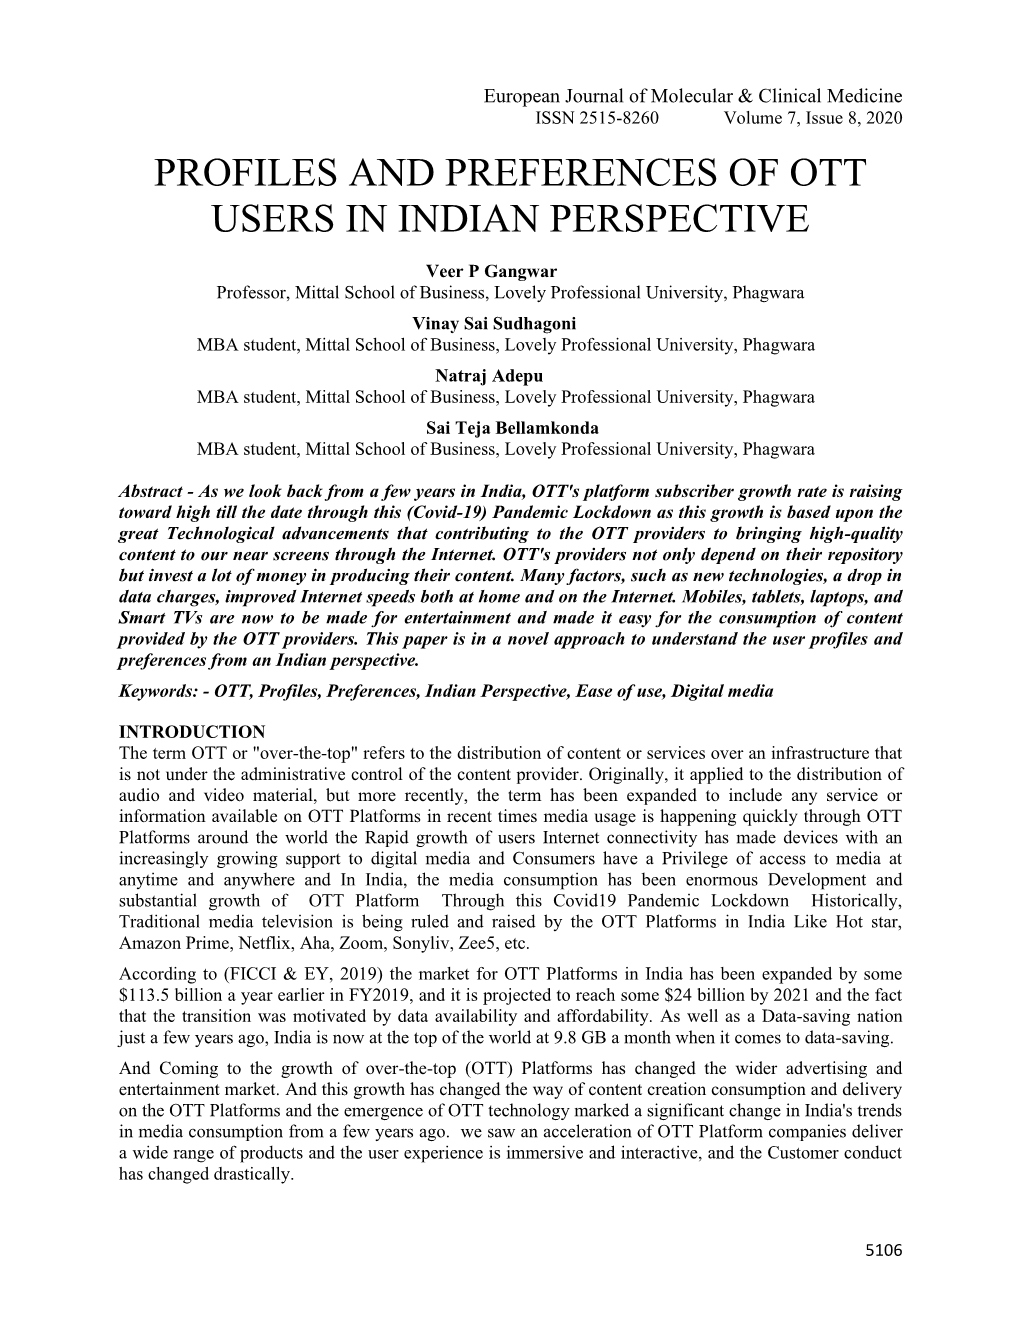 Profiles and Preferences of Ott Users in Indian Perspective